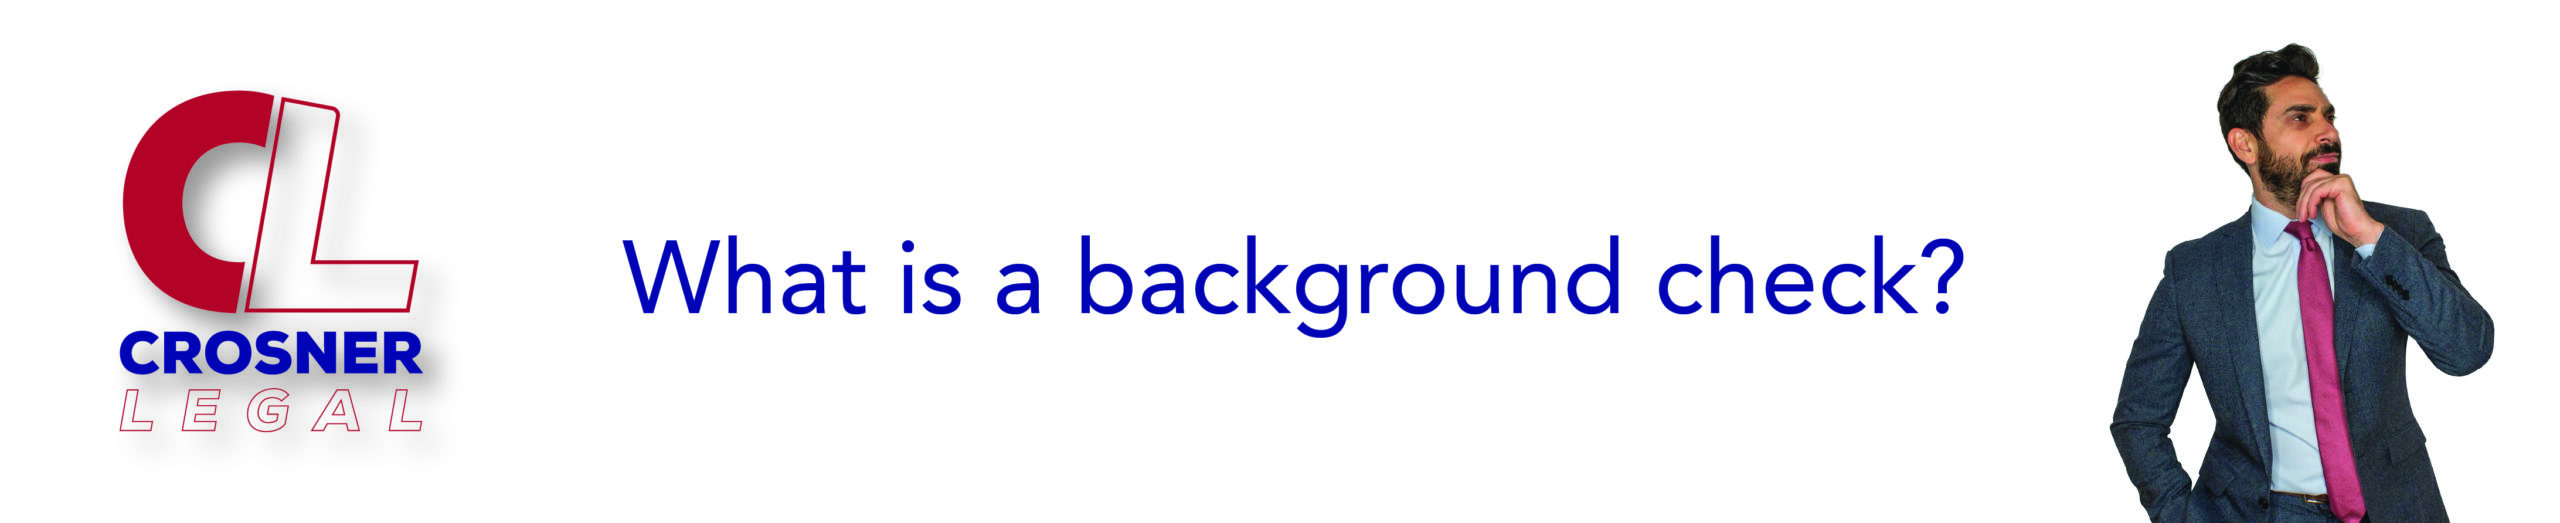 What is a background check?